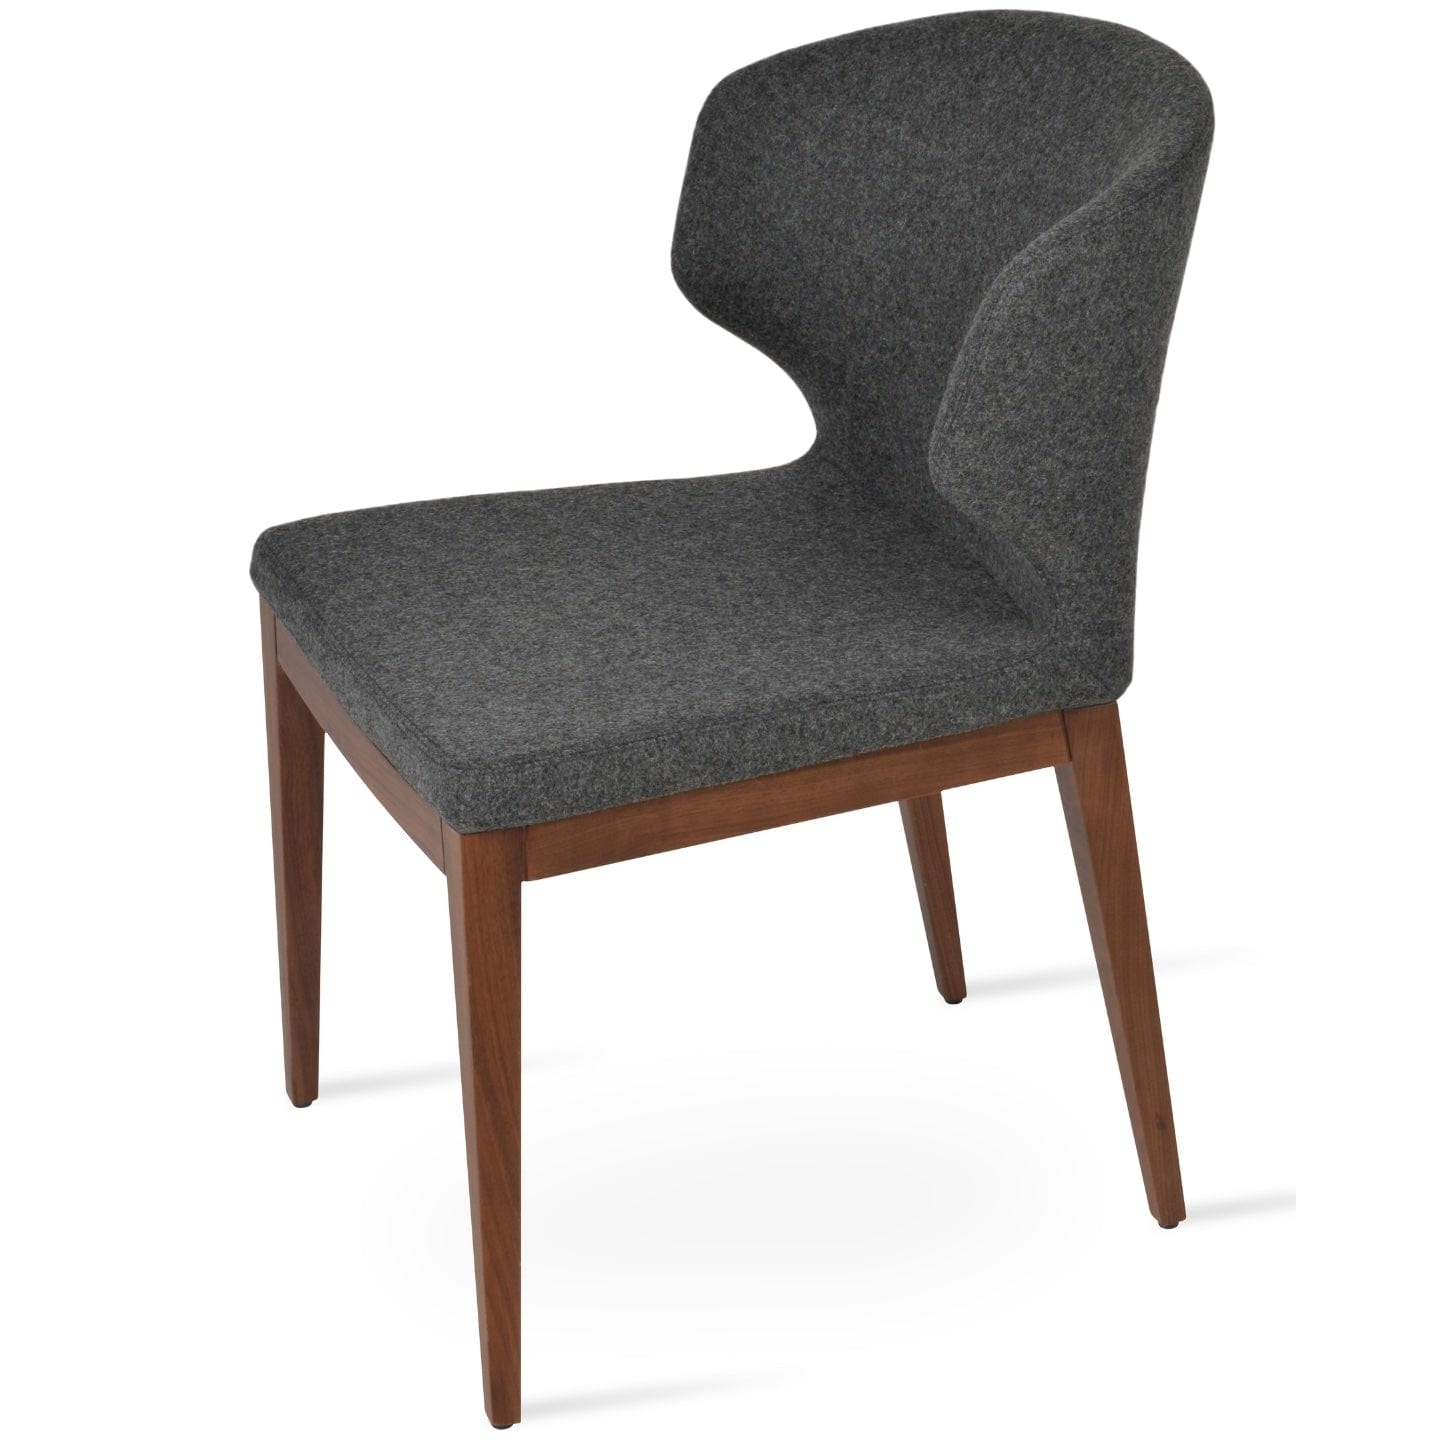 sohoConcept Kitchen & Dining Room Chairs Amed Wood PLUS Chairs | Wool Upholstered Wooden Dining Chairs